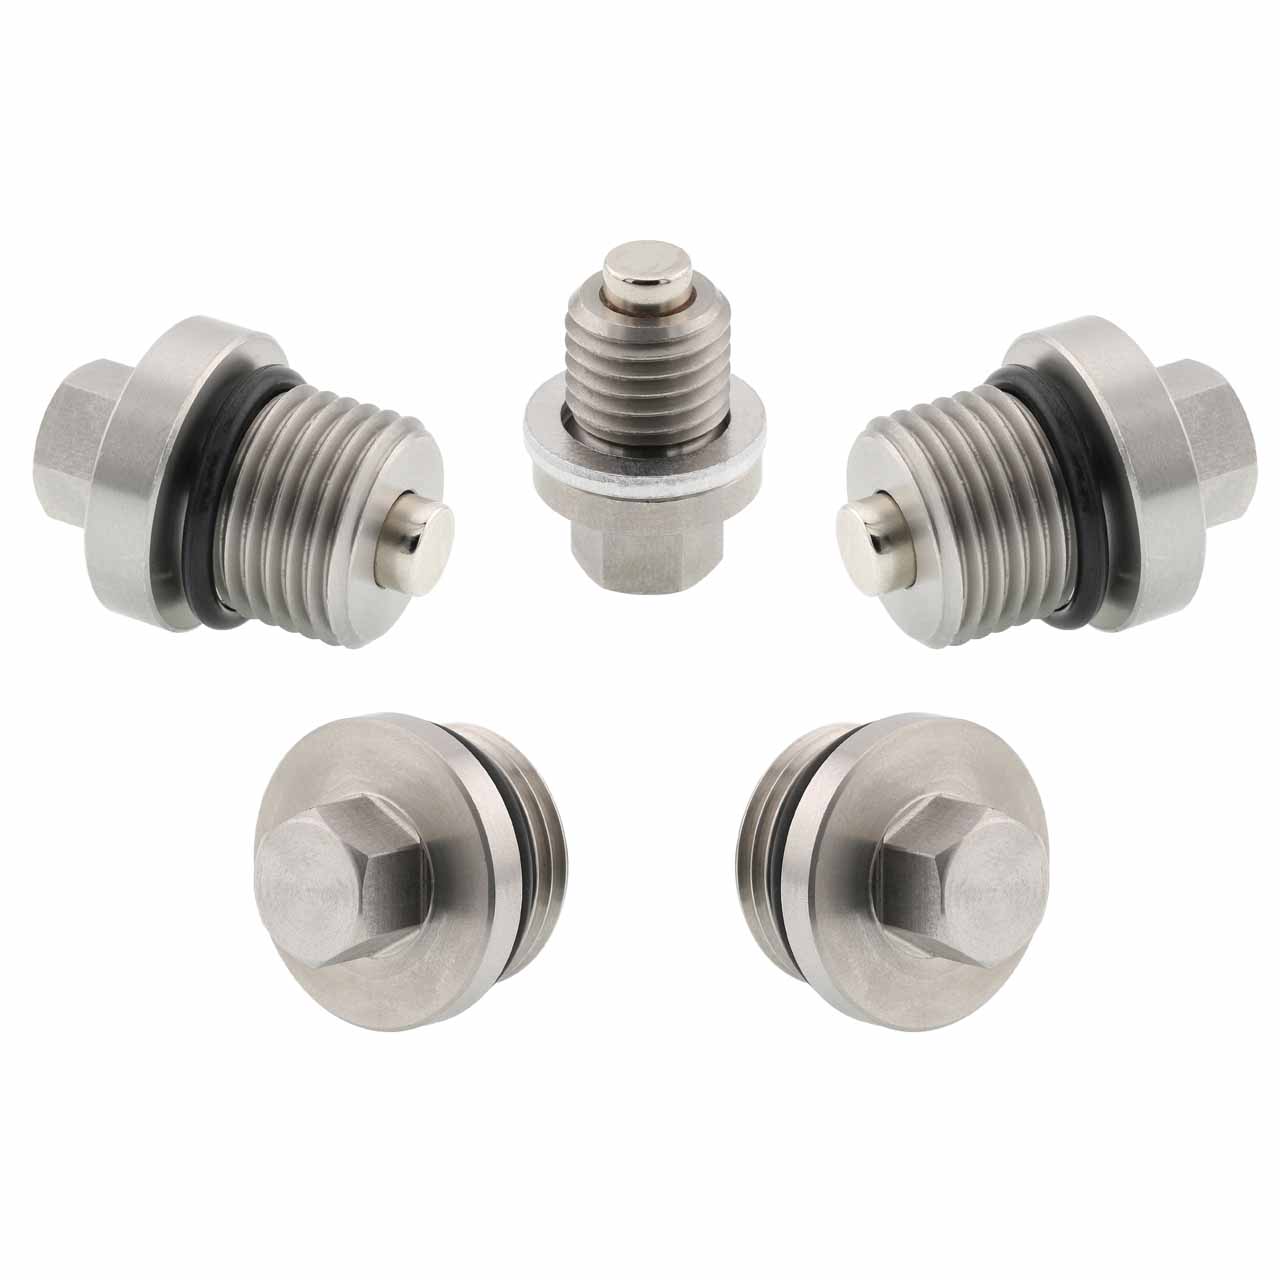 Polaris ACE 570 SP Magnetic Oil Drain Plug Kit - 2016-2017 - Engine, Transmission, Differential - Made In USA